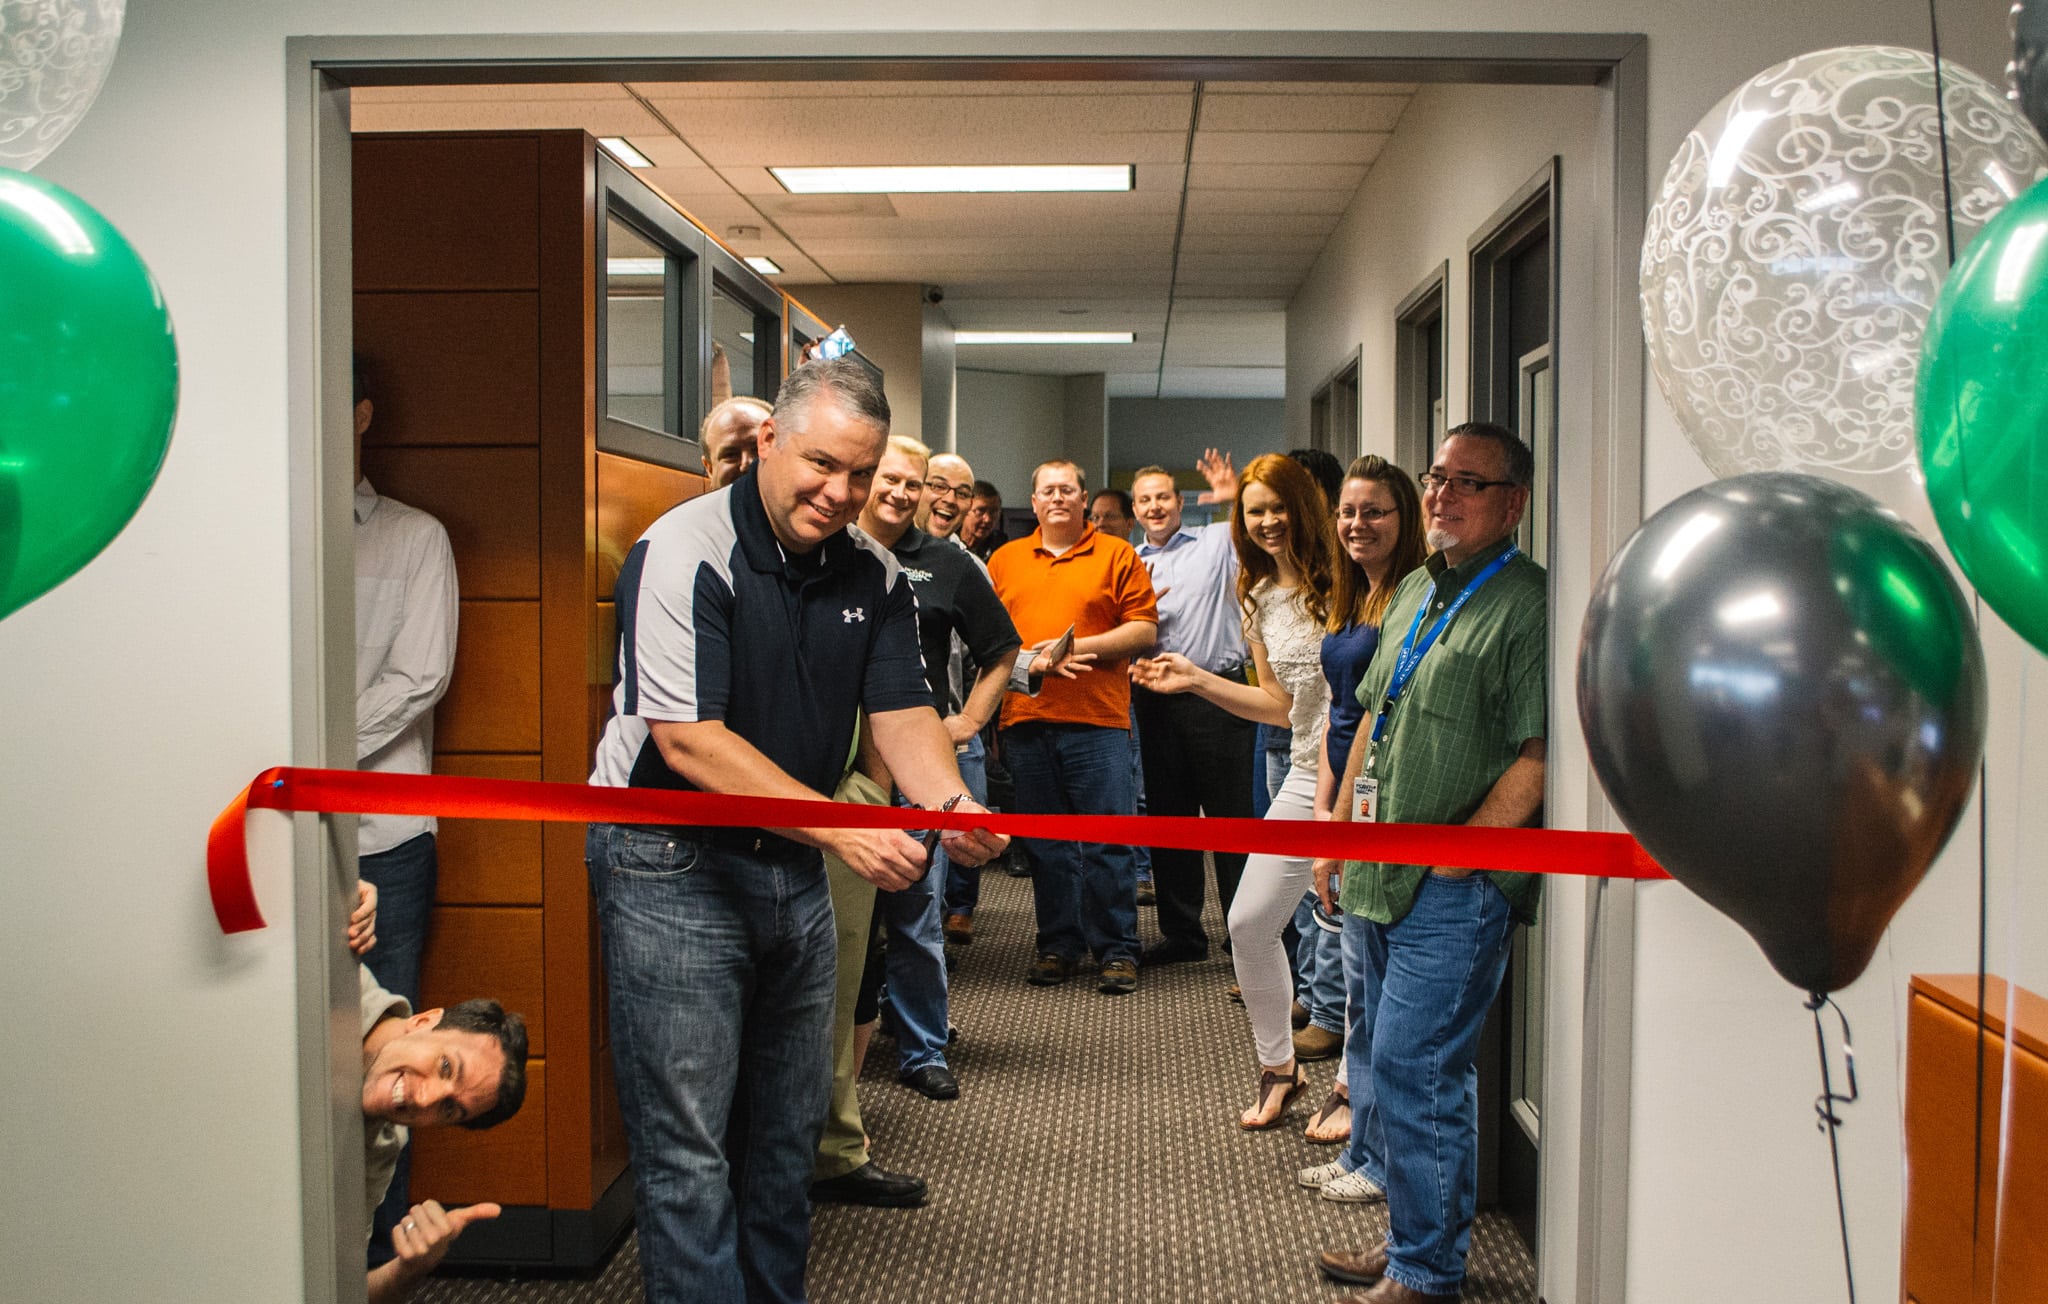 Point of Rental Software cuts ribbon to reveal our new space and growth